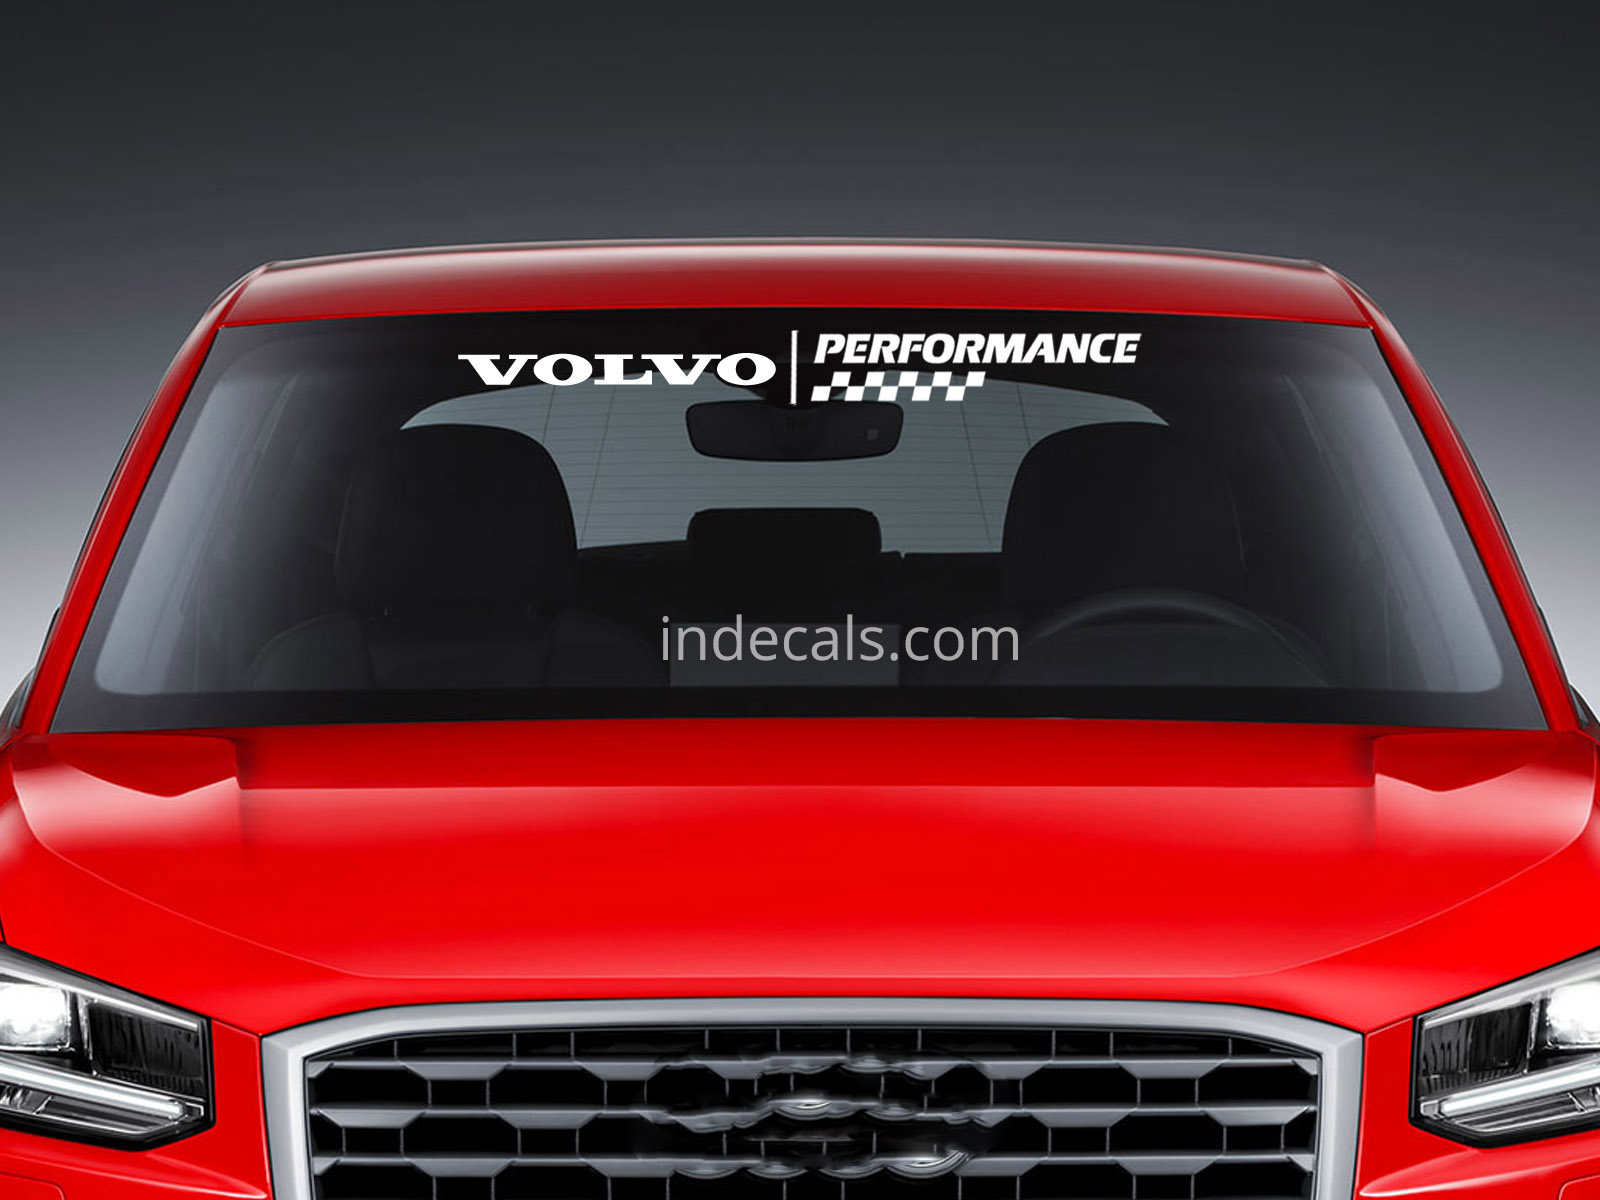 1 x Volvo Performance Sticker for Windshield or Back Window - White